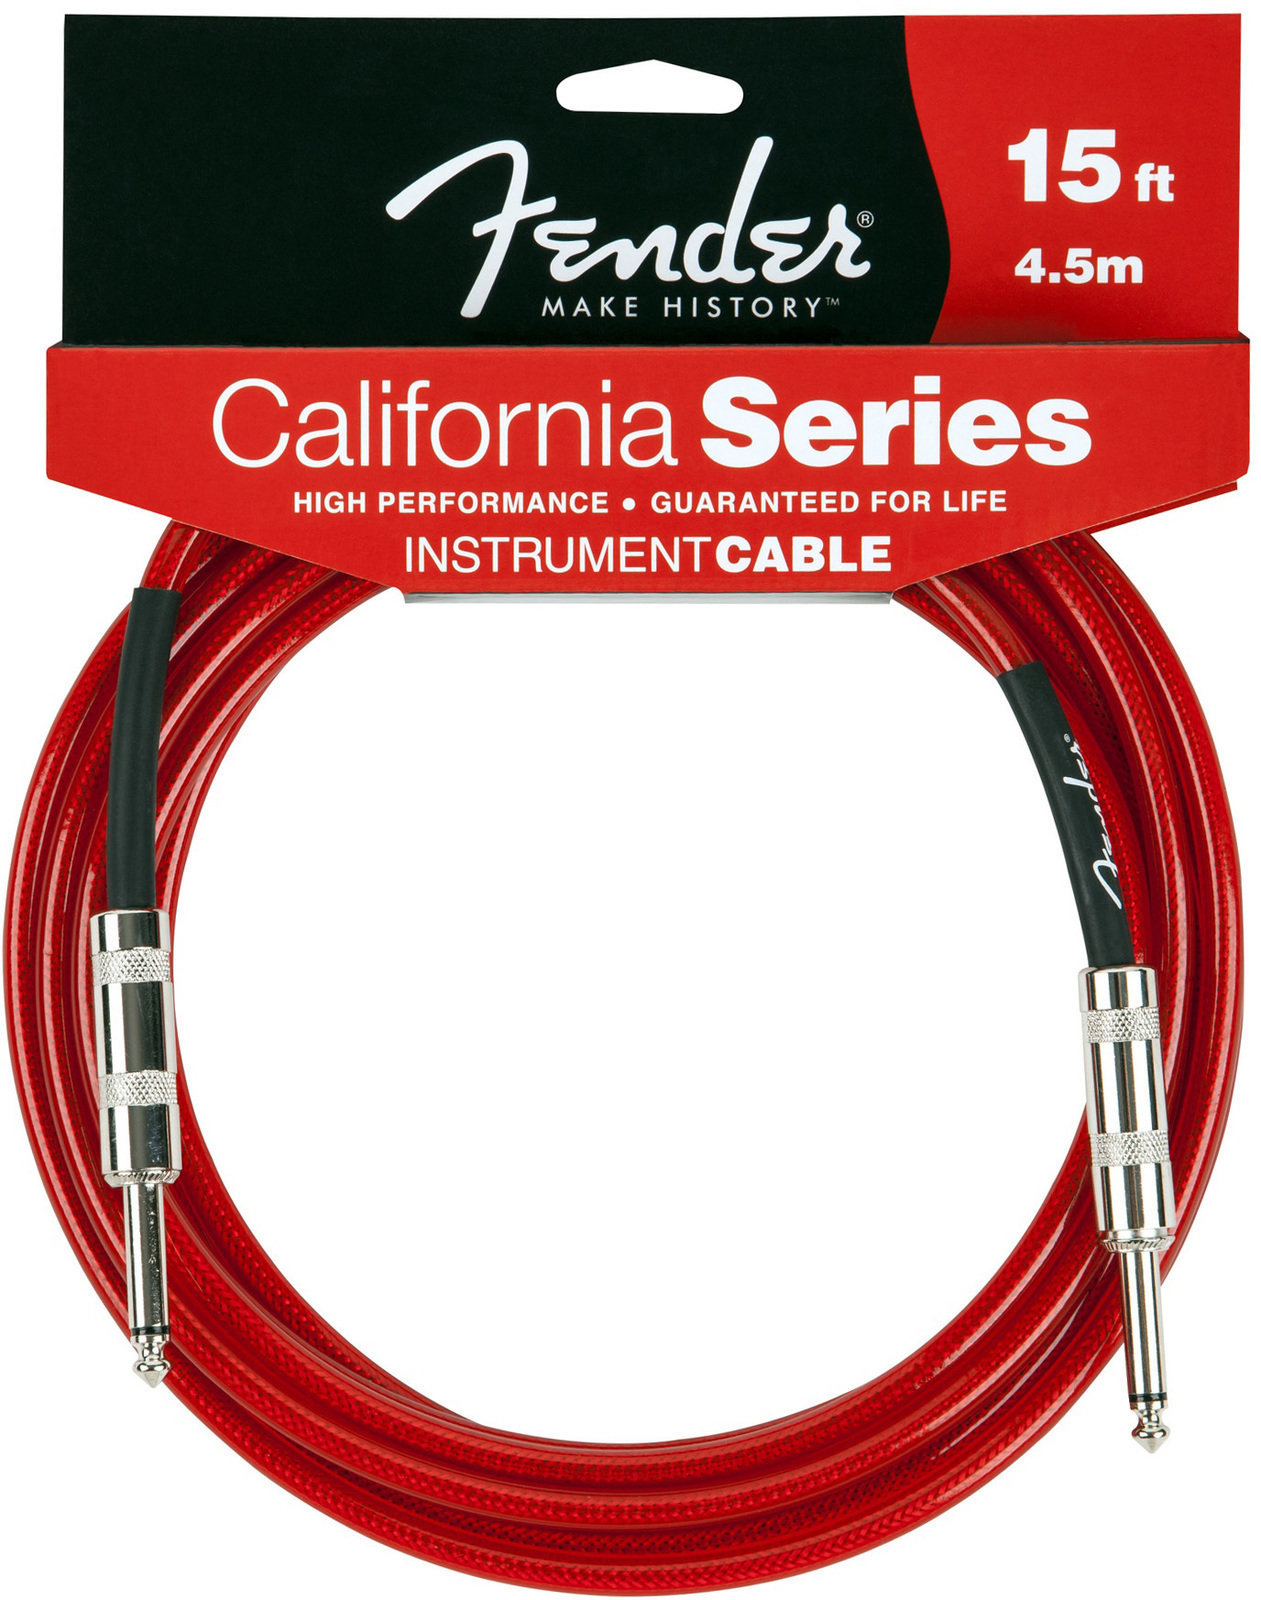 Instrument Cable Fender California Instrument Cable 4,5m - Candy Apple Red